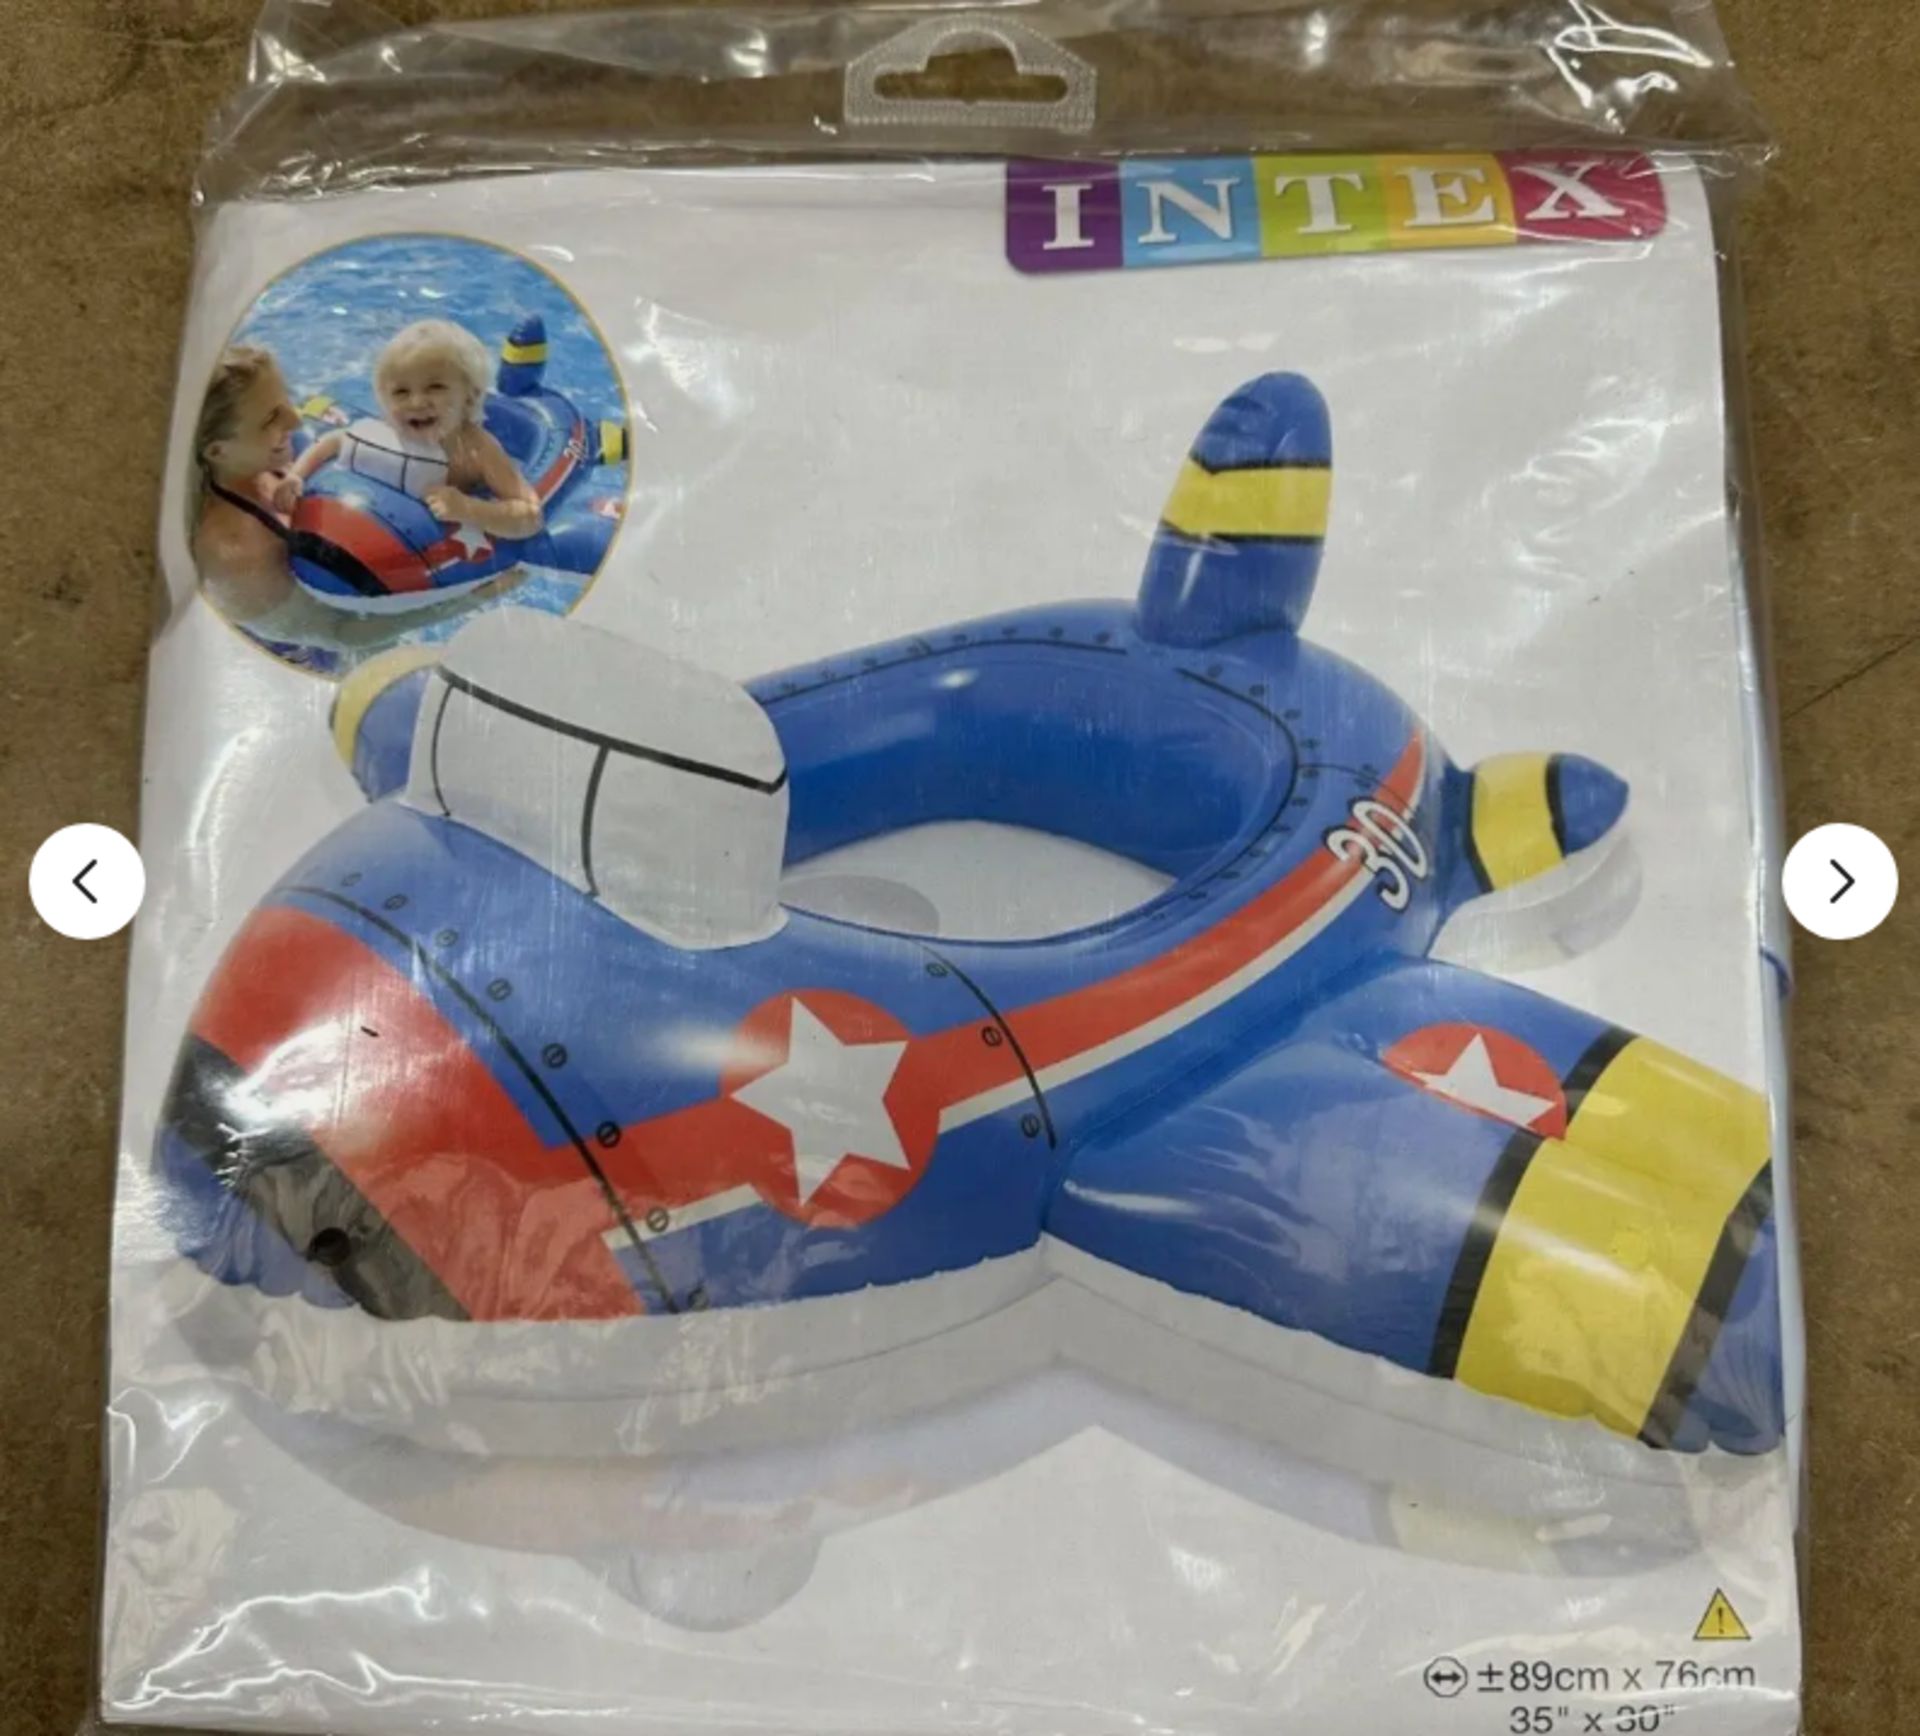 50 x Intex Inflatable Swimming Pool Float Kids Floatation (Mix of Themes). RRP £300 - Grade A - Image 2 of 3